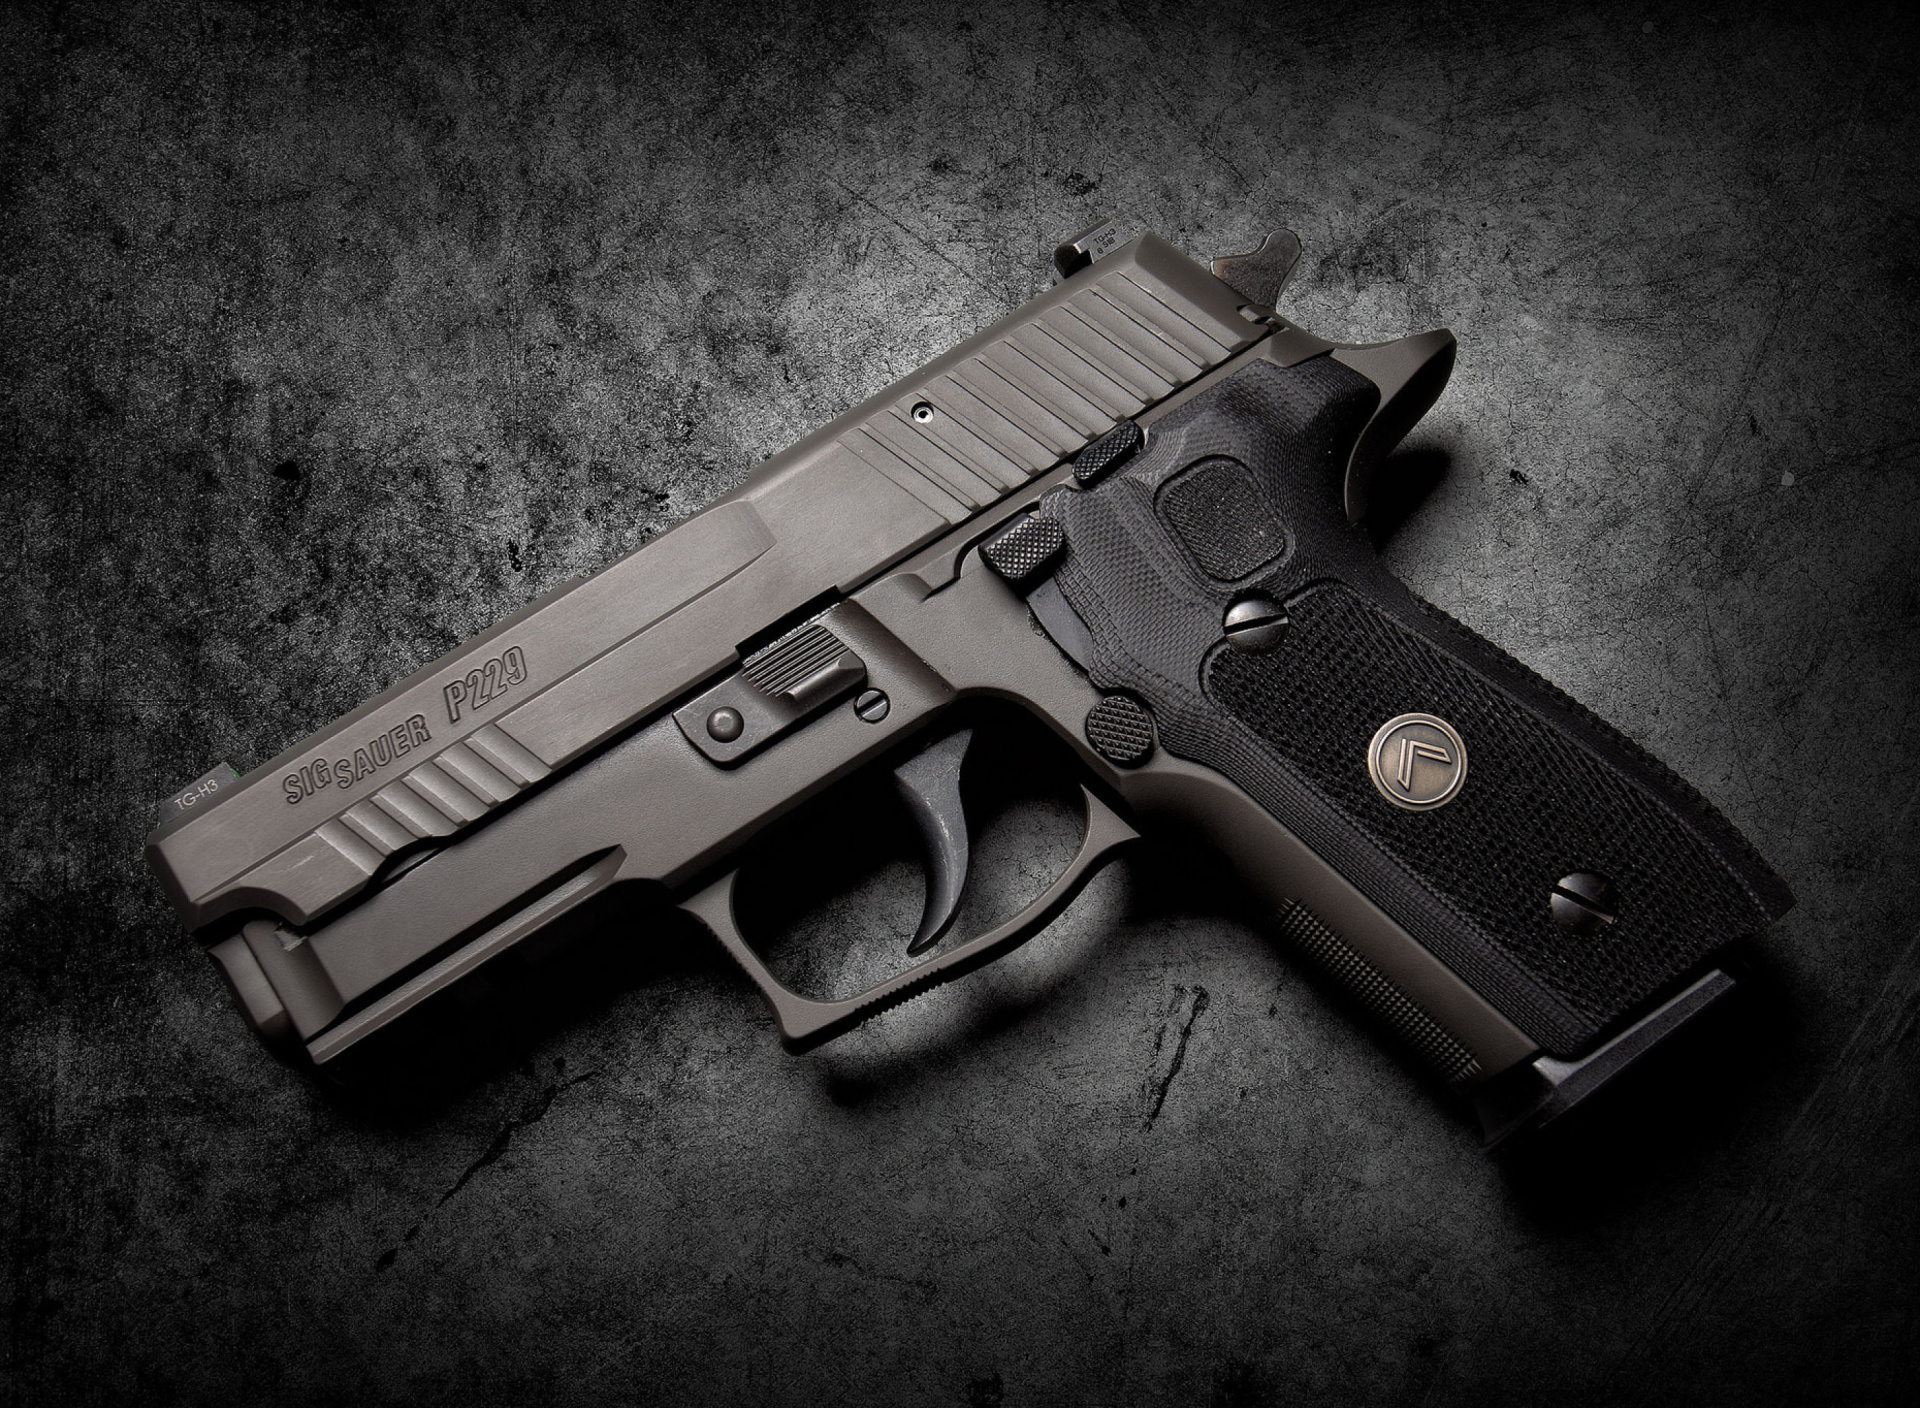 Sig Sauer Sigarms Pistols P229 wallpaper 1920x1408